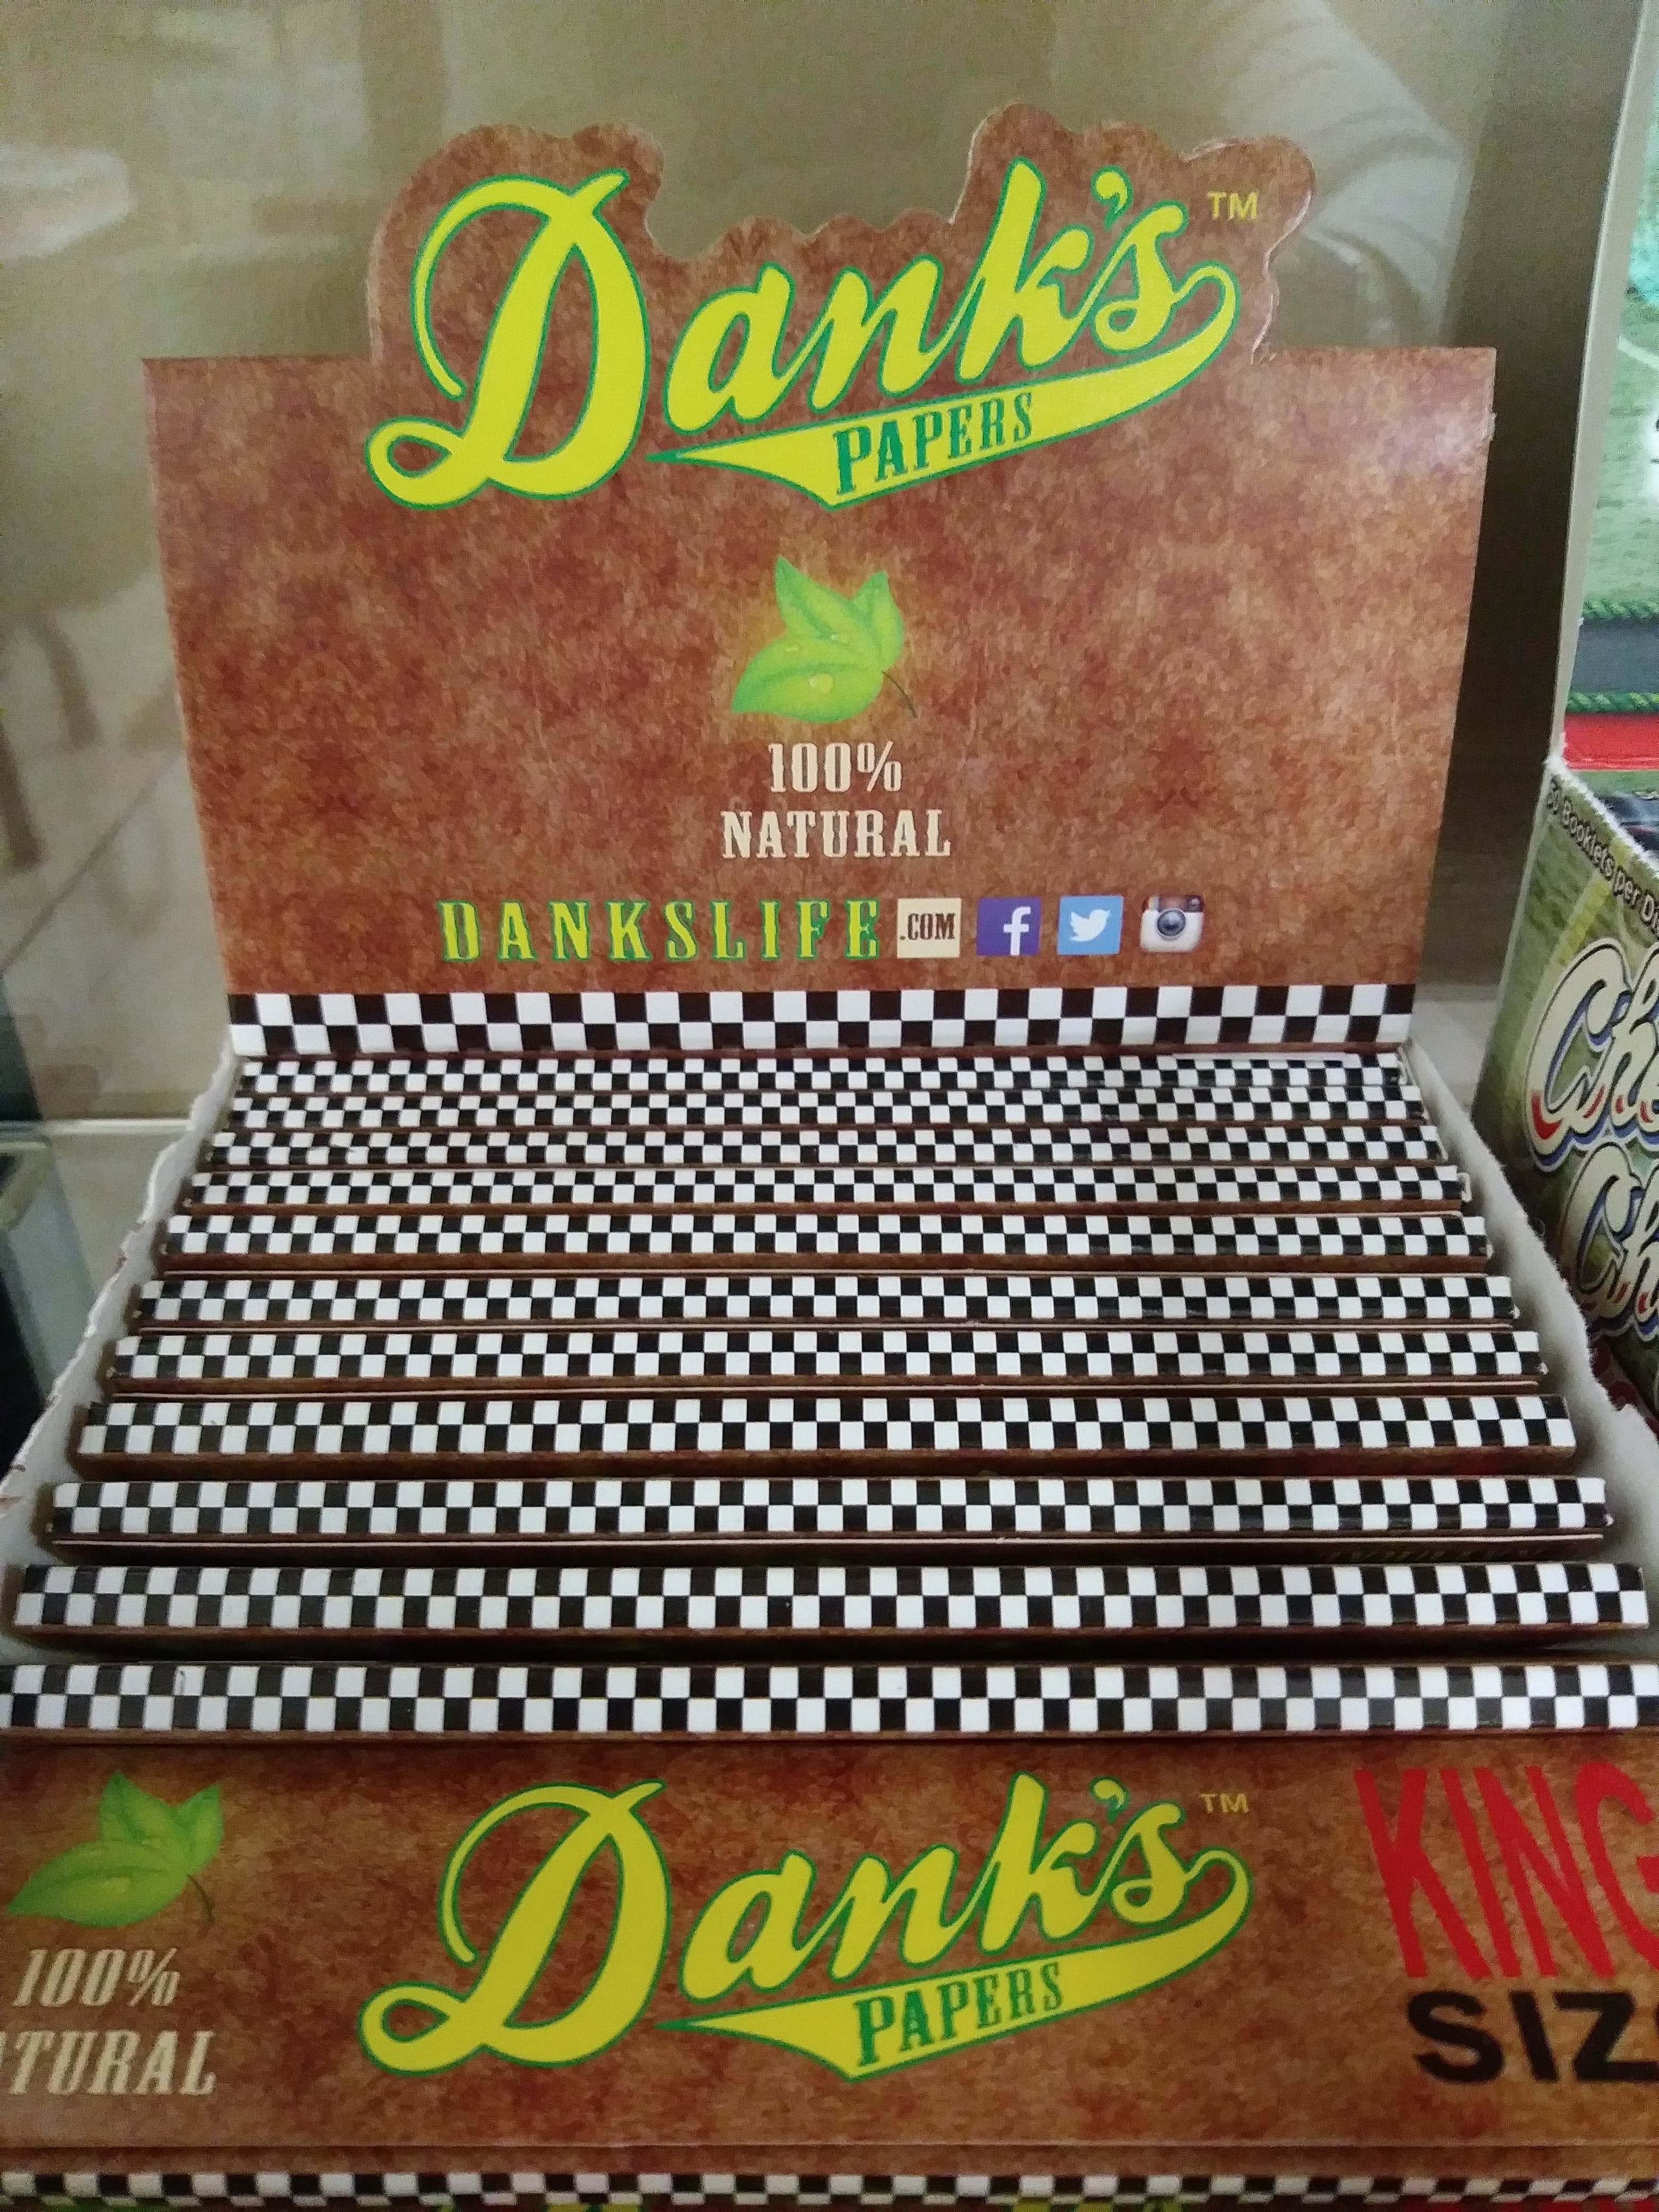 gear-danks-papers-king-size